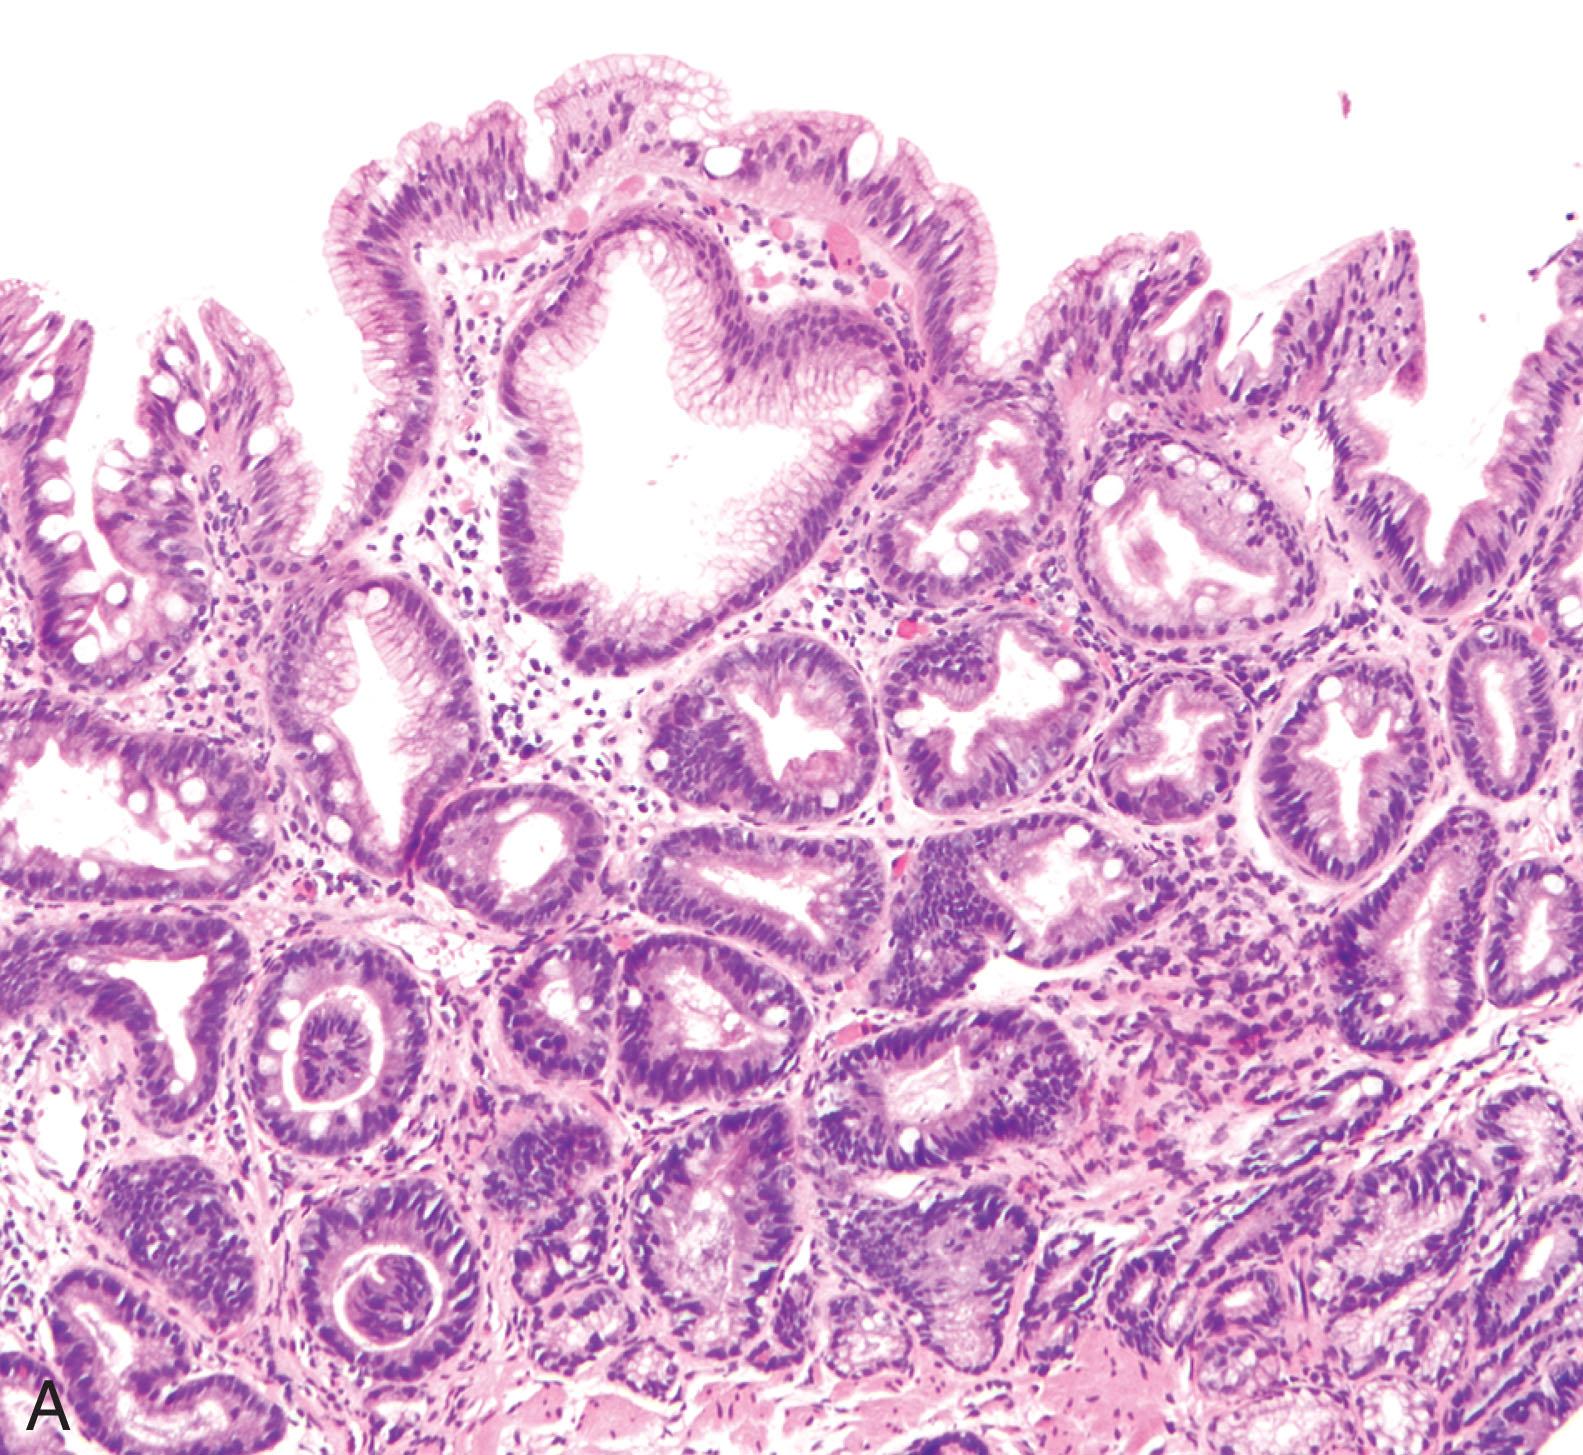 Figure 2.9, Barrett’s esophagus, negative for dysplasia ( A ). The basal aspect of the crypts often appears regenerative and may be mistaken for dysplasia. The presence of surface maturation, as illustrated in this case, argues against a diagnosis of dysplasia. A “wild-type” pattern of p53 immunoreactivity shows scattered nuclei with weak positive staining ( B ) and can sometimes be useful in confirming the morphologic impression. Routine use of p53 immunostain in all surveillance biopsies is not recommended.